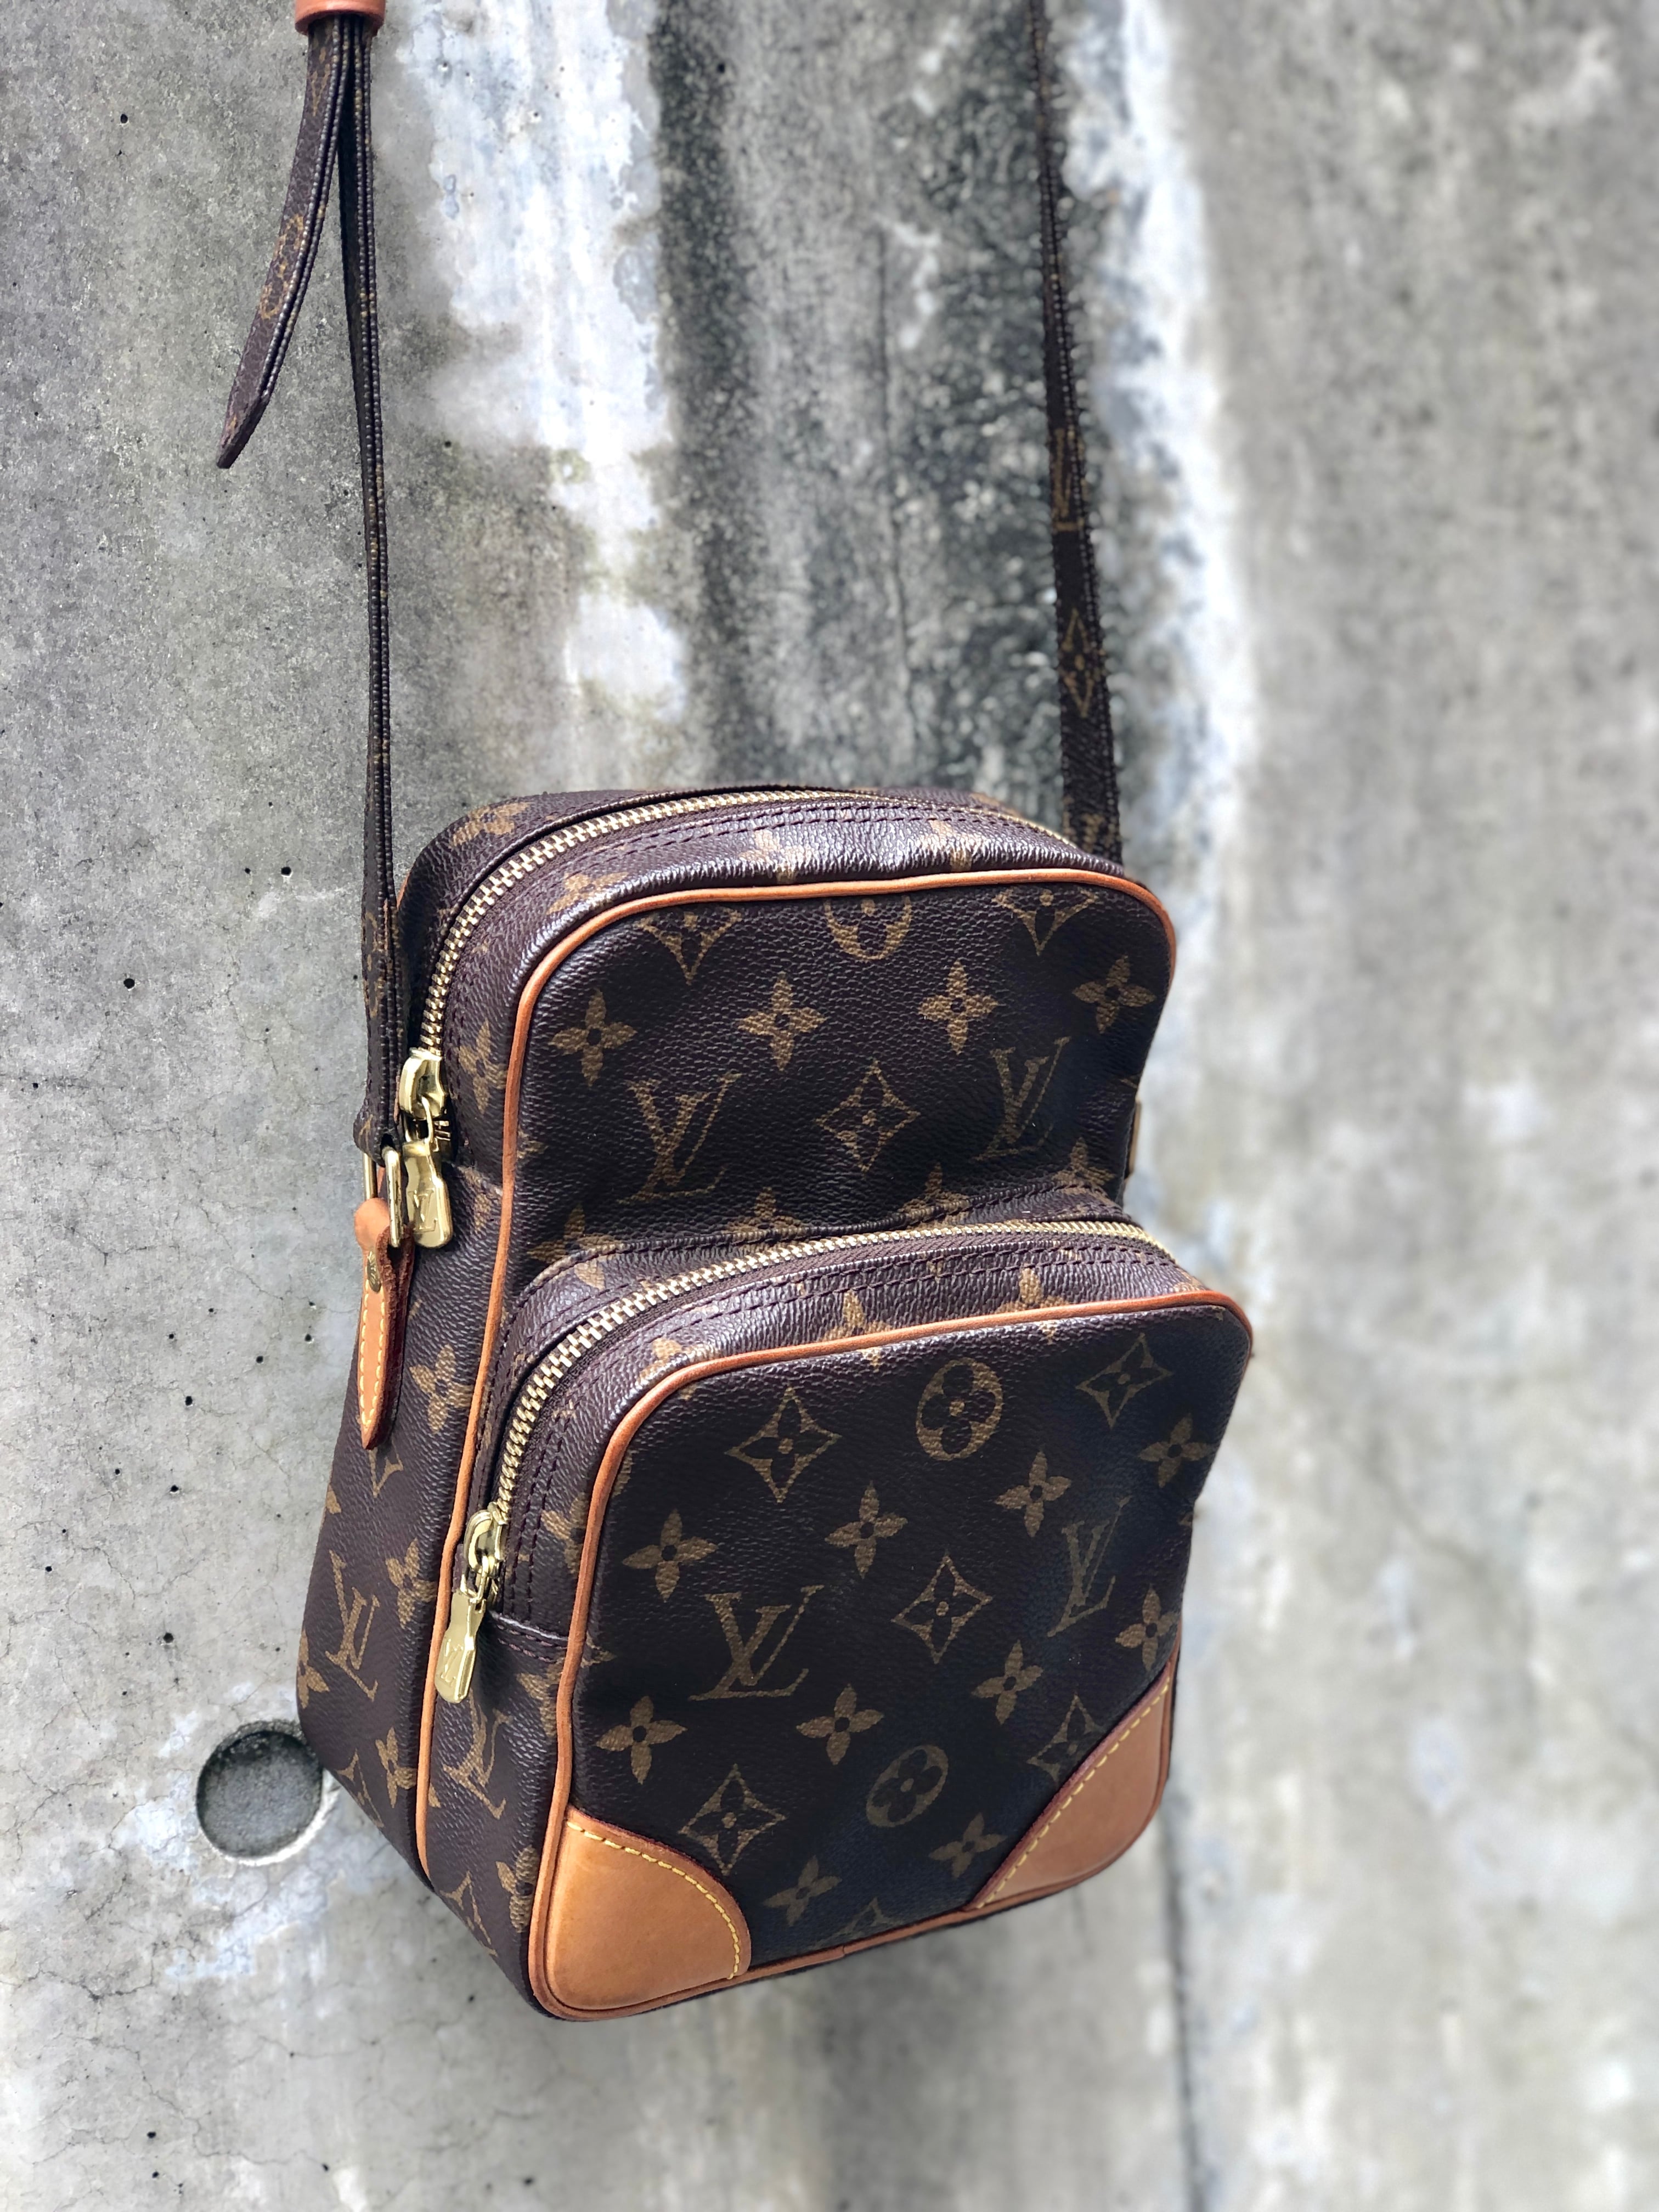 LOUIS VUITTON ルイヴィトン　モノグラム　M45236　アマゾン　 ポシェット　ショルダーバッグ　ブラウン　vintage　ヴィンテージ　 オールド　ef5htg | VintageShop solo powered by BASE